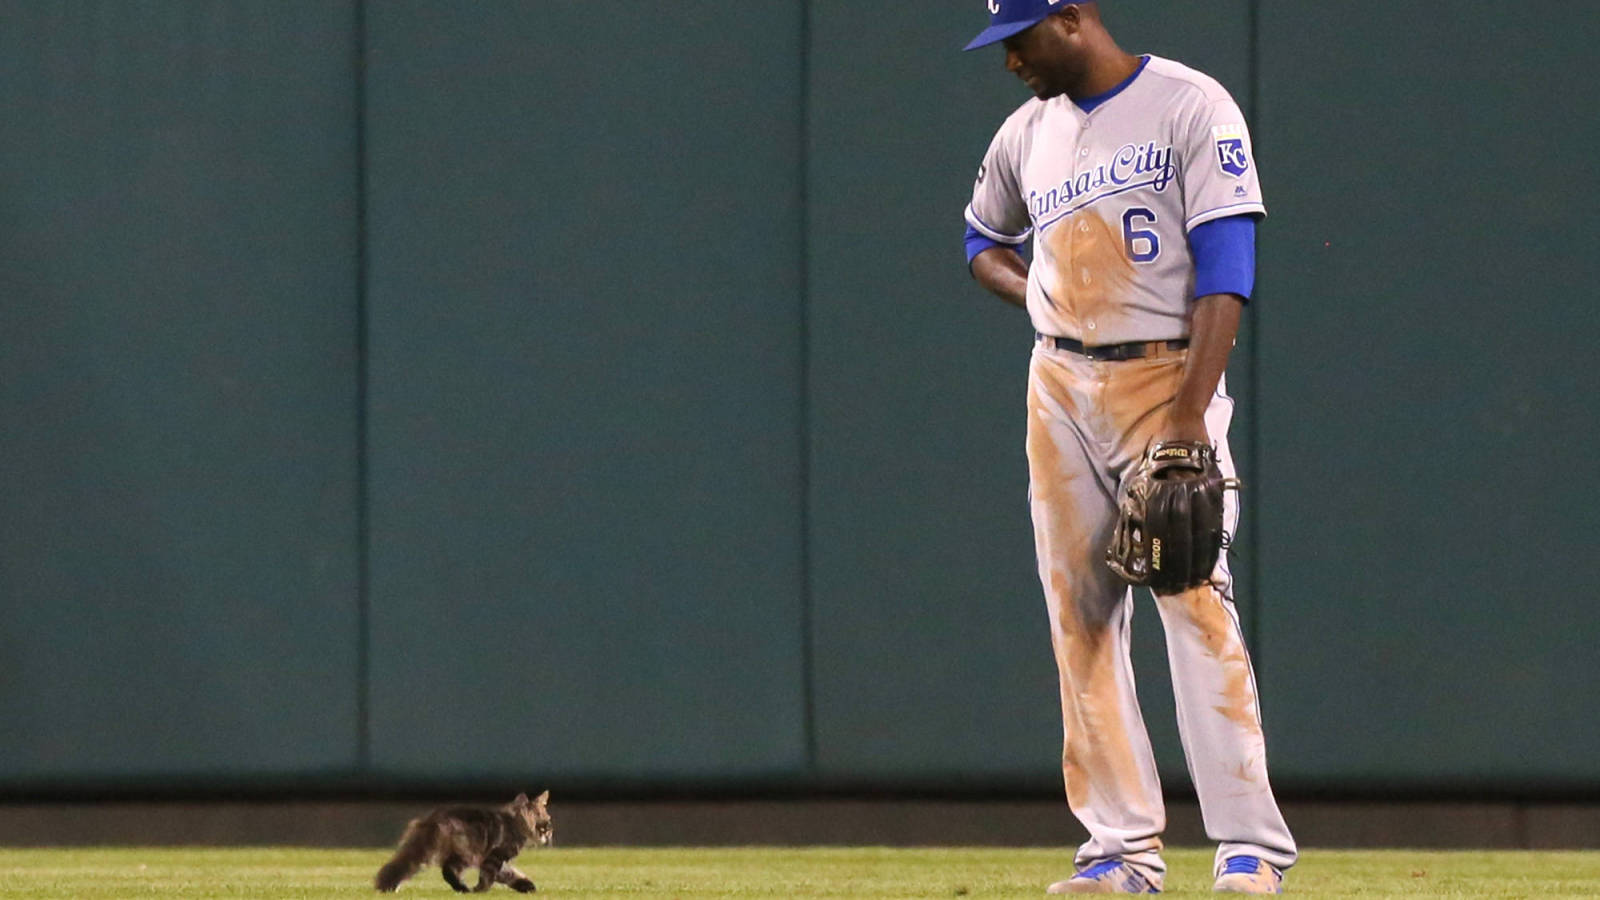 Box Score 8/10: Sports and cute animals, what more you want?